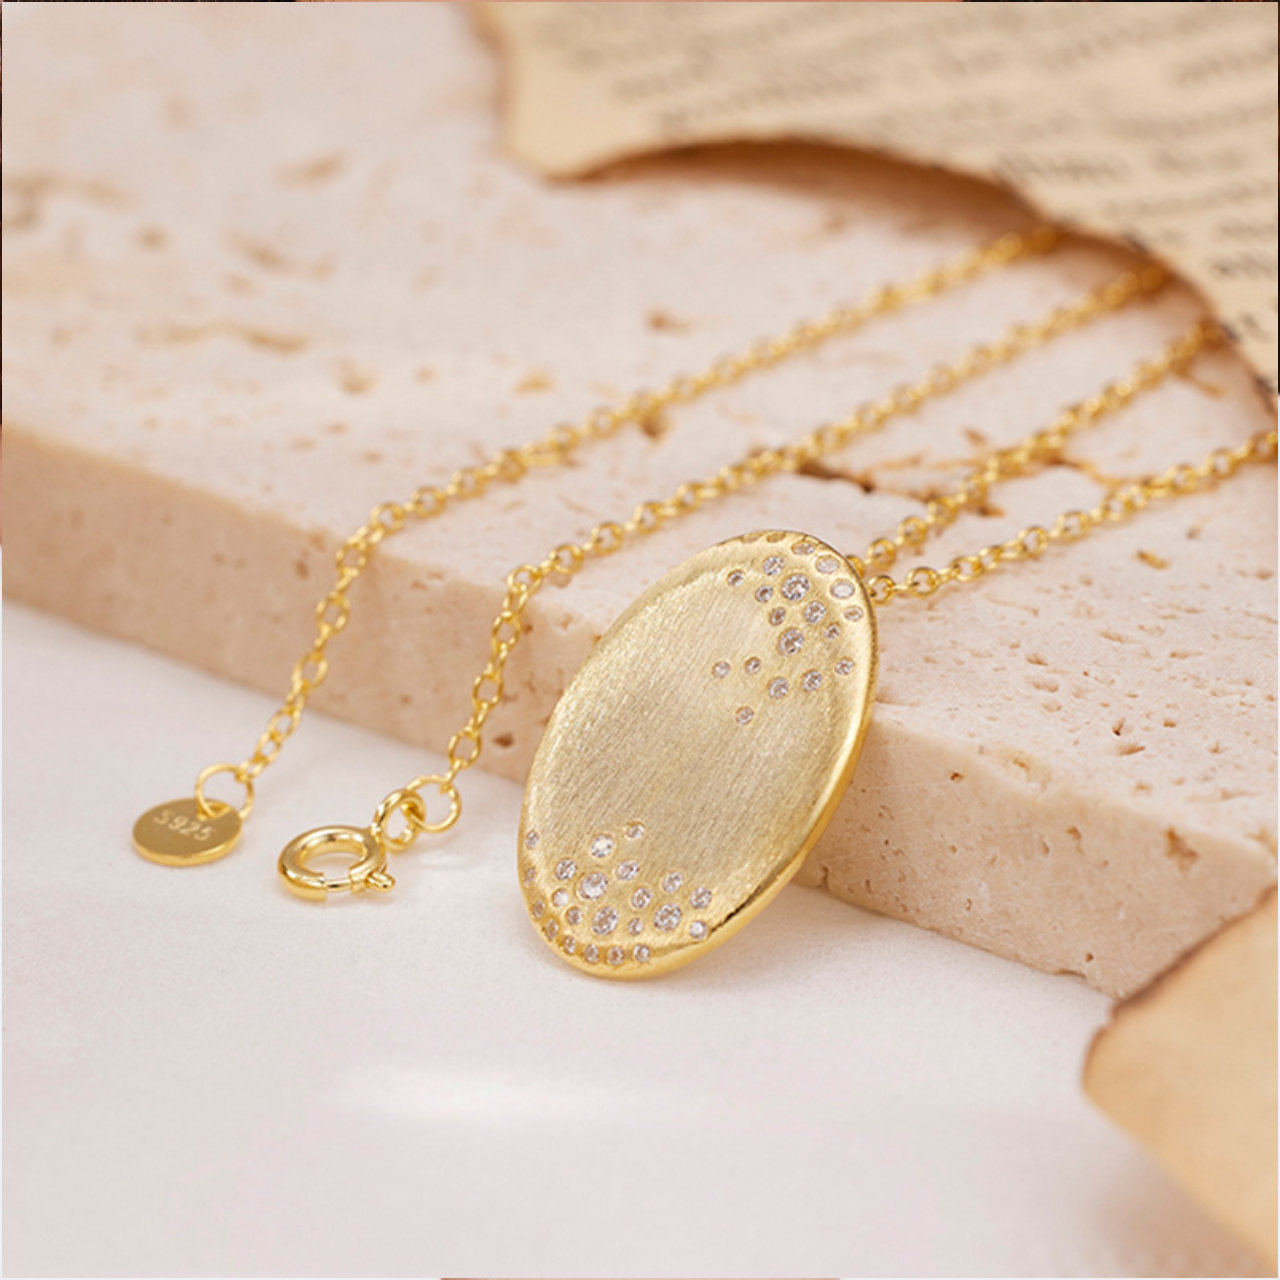 Oval pendant gold necklace